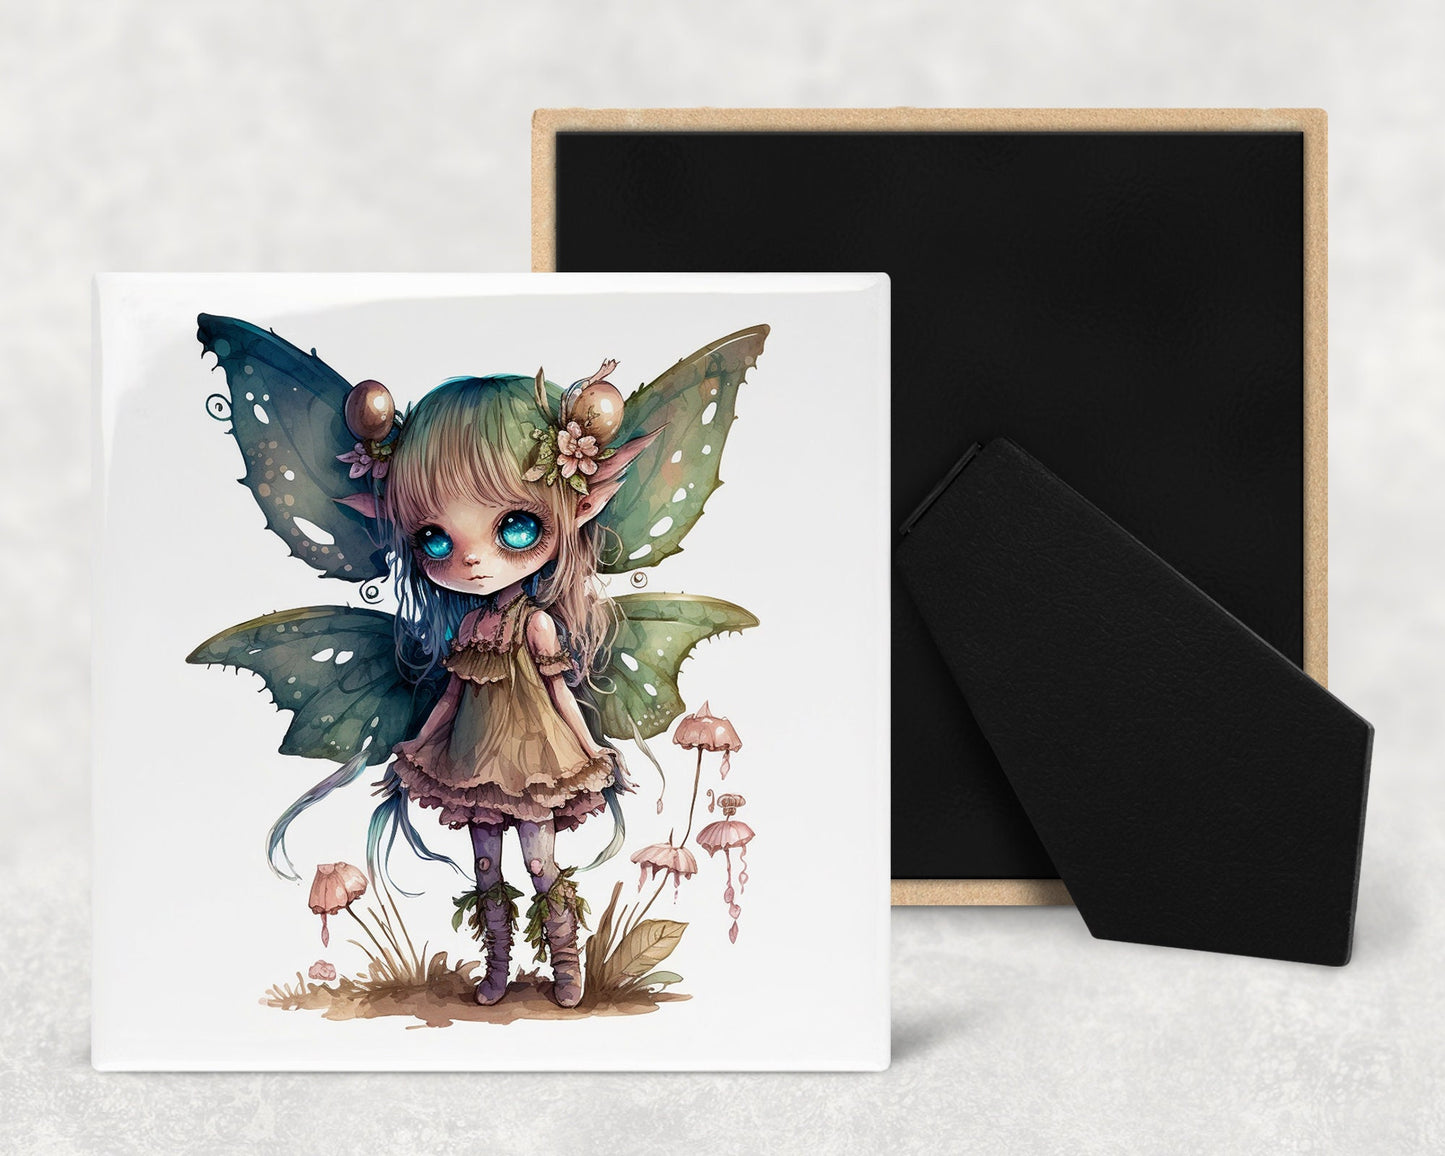 Cute Fae Art Decorative Ceramic Tile Set with Optional Easel Back - Available in 4 sizes - Set of 4